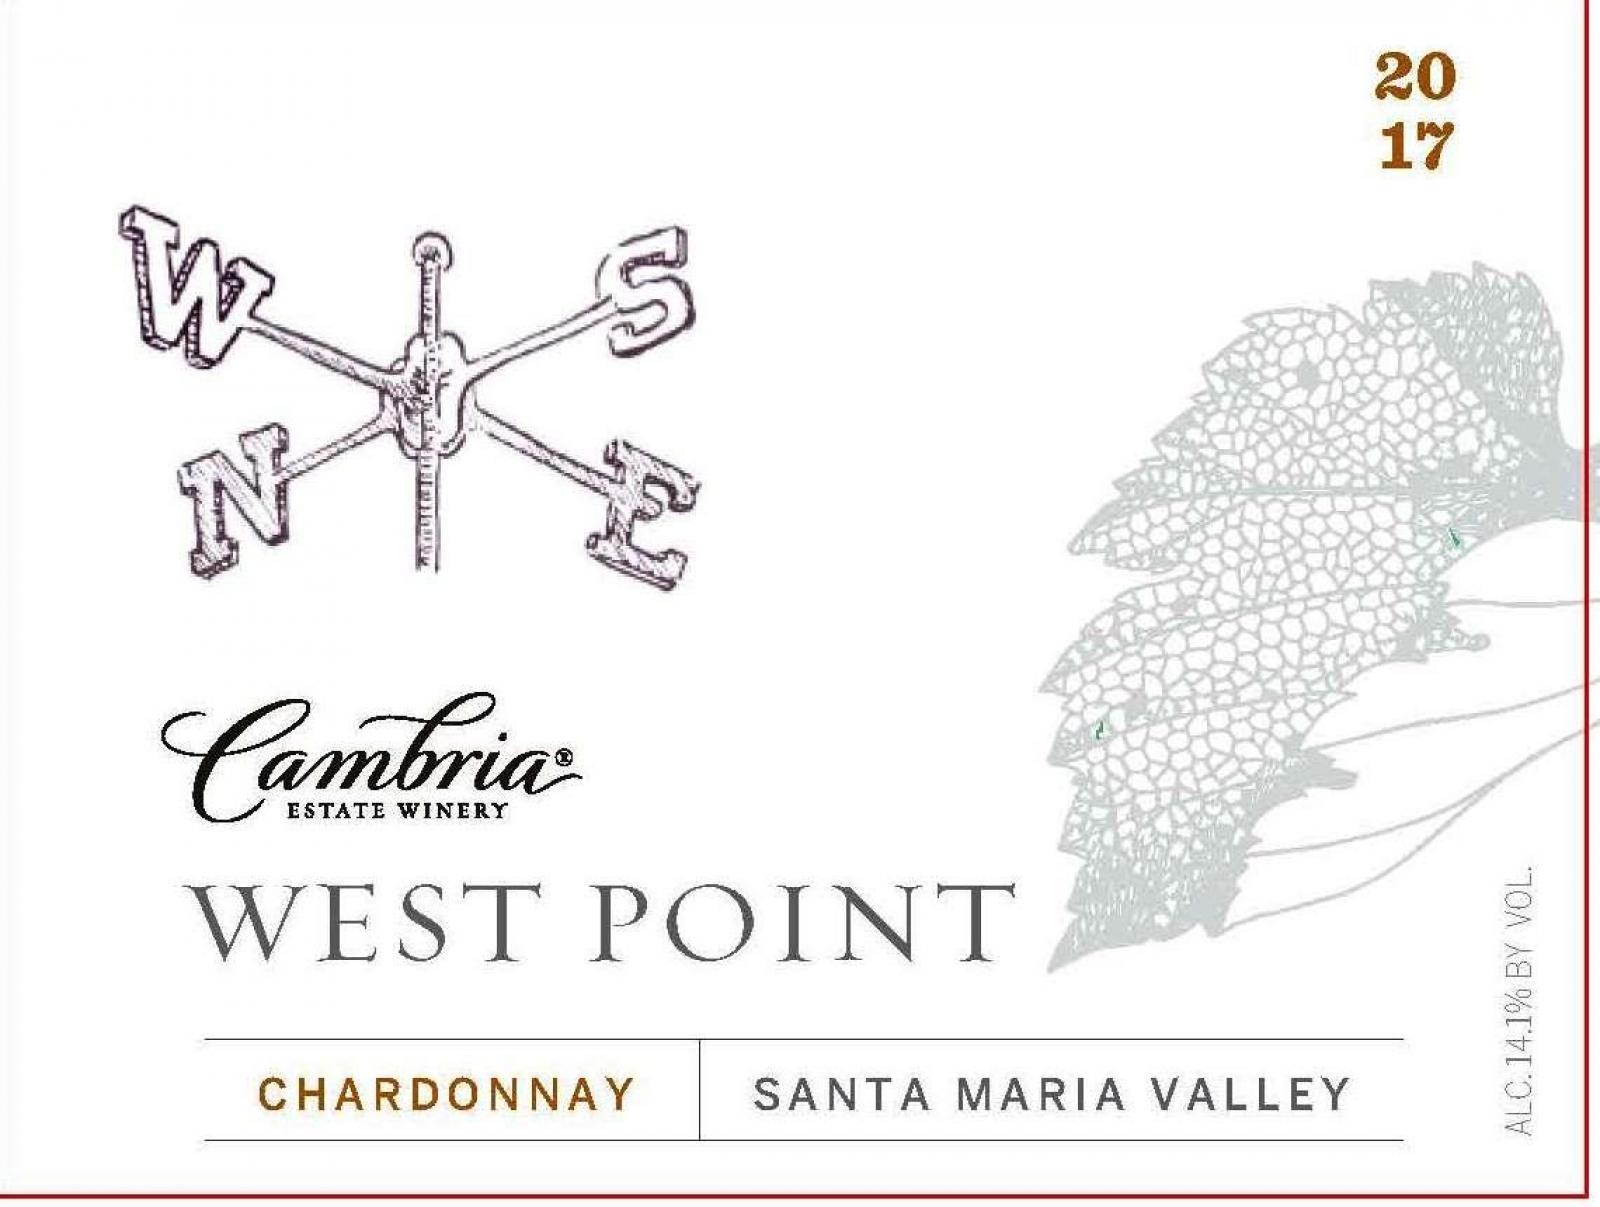 2017 Cambria Estate Winery West Point Chardonnay 